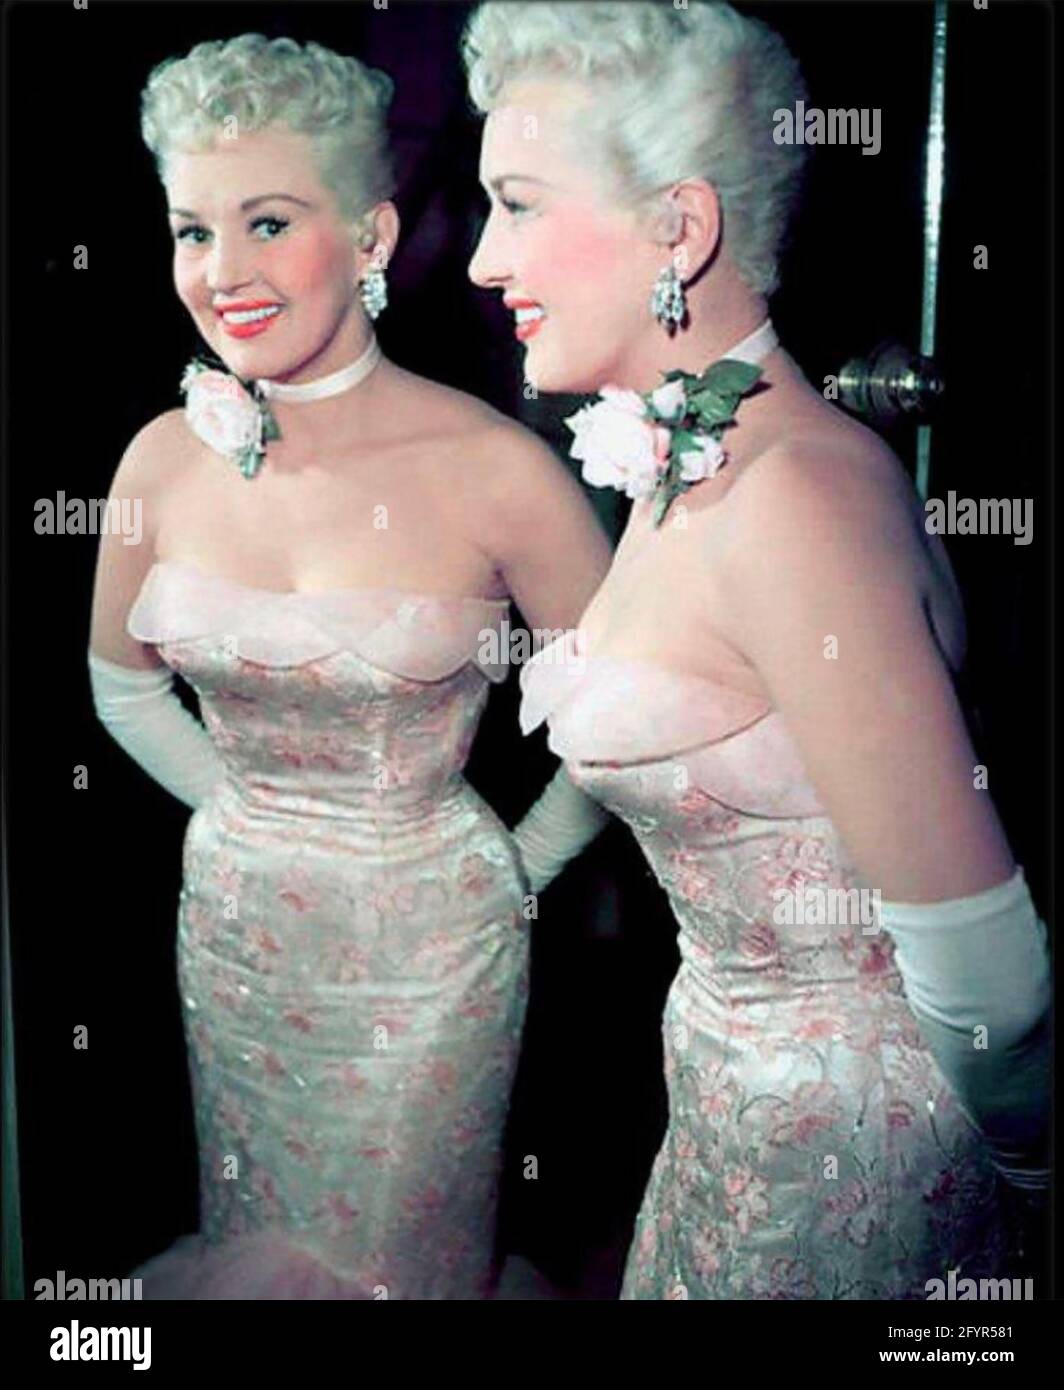 BETTY GRABLE (1916-1973) American film actress about 1955 Stock Photo